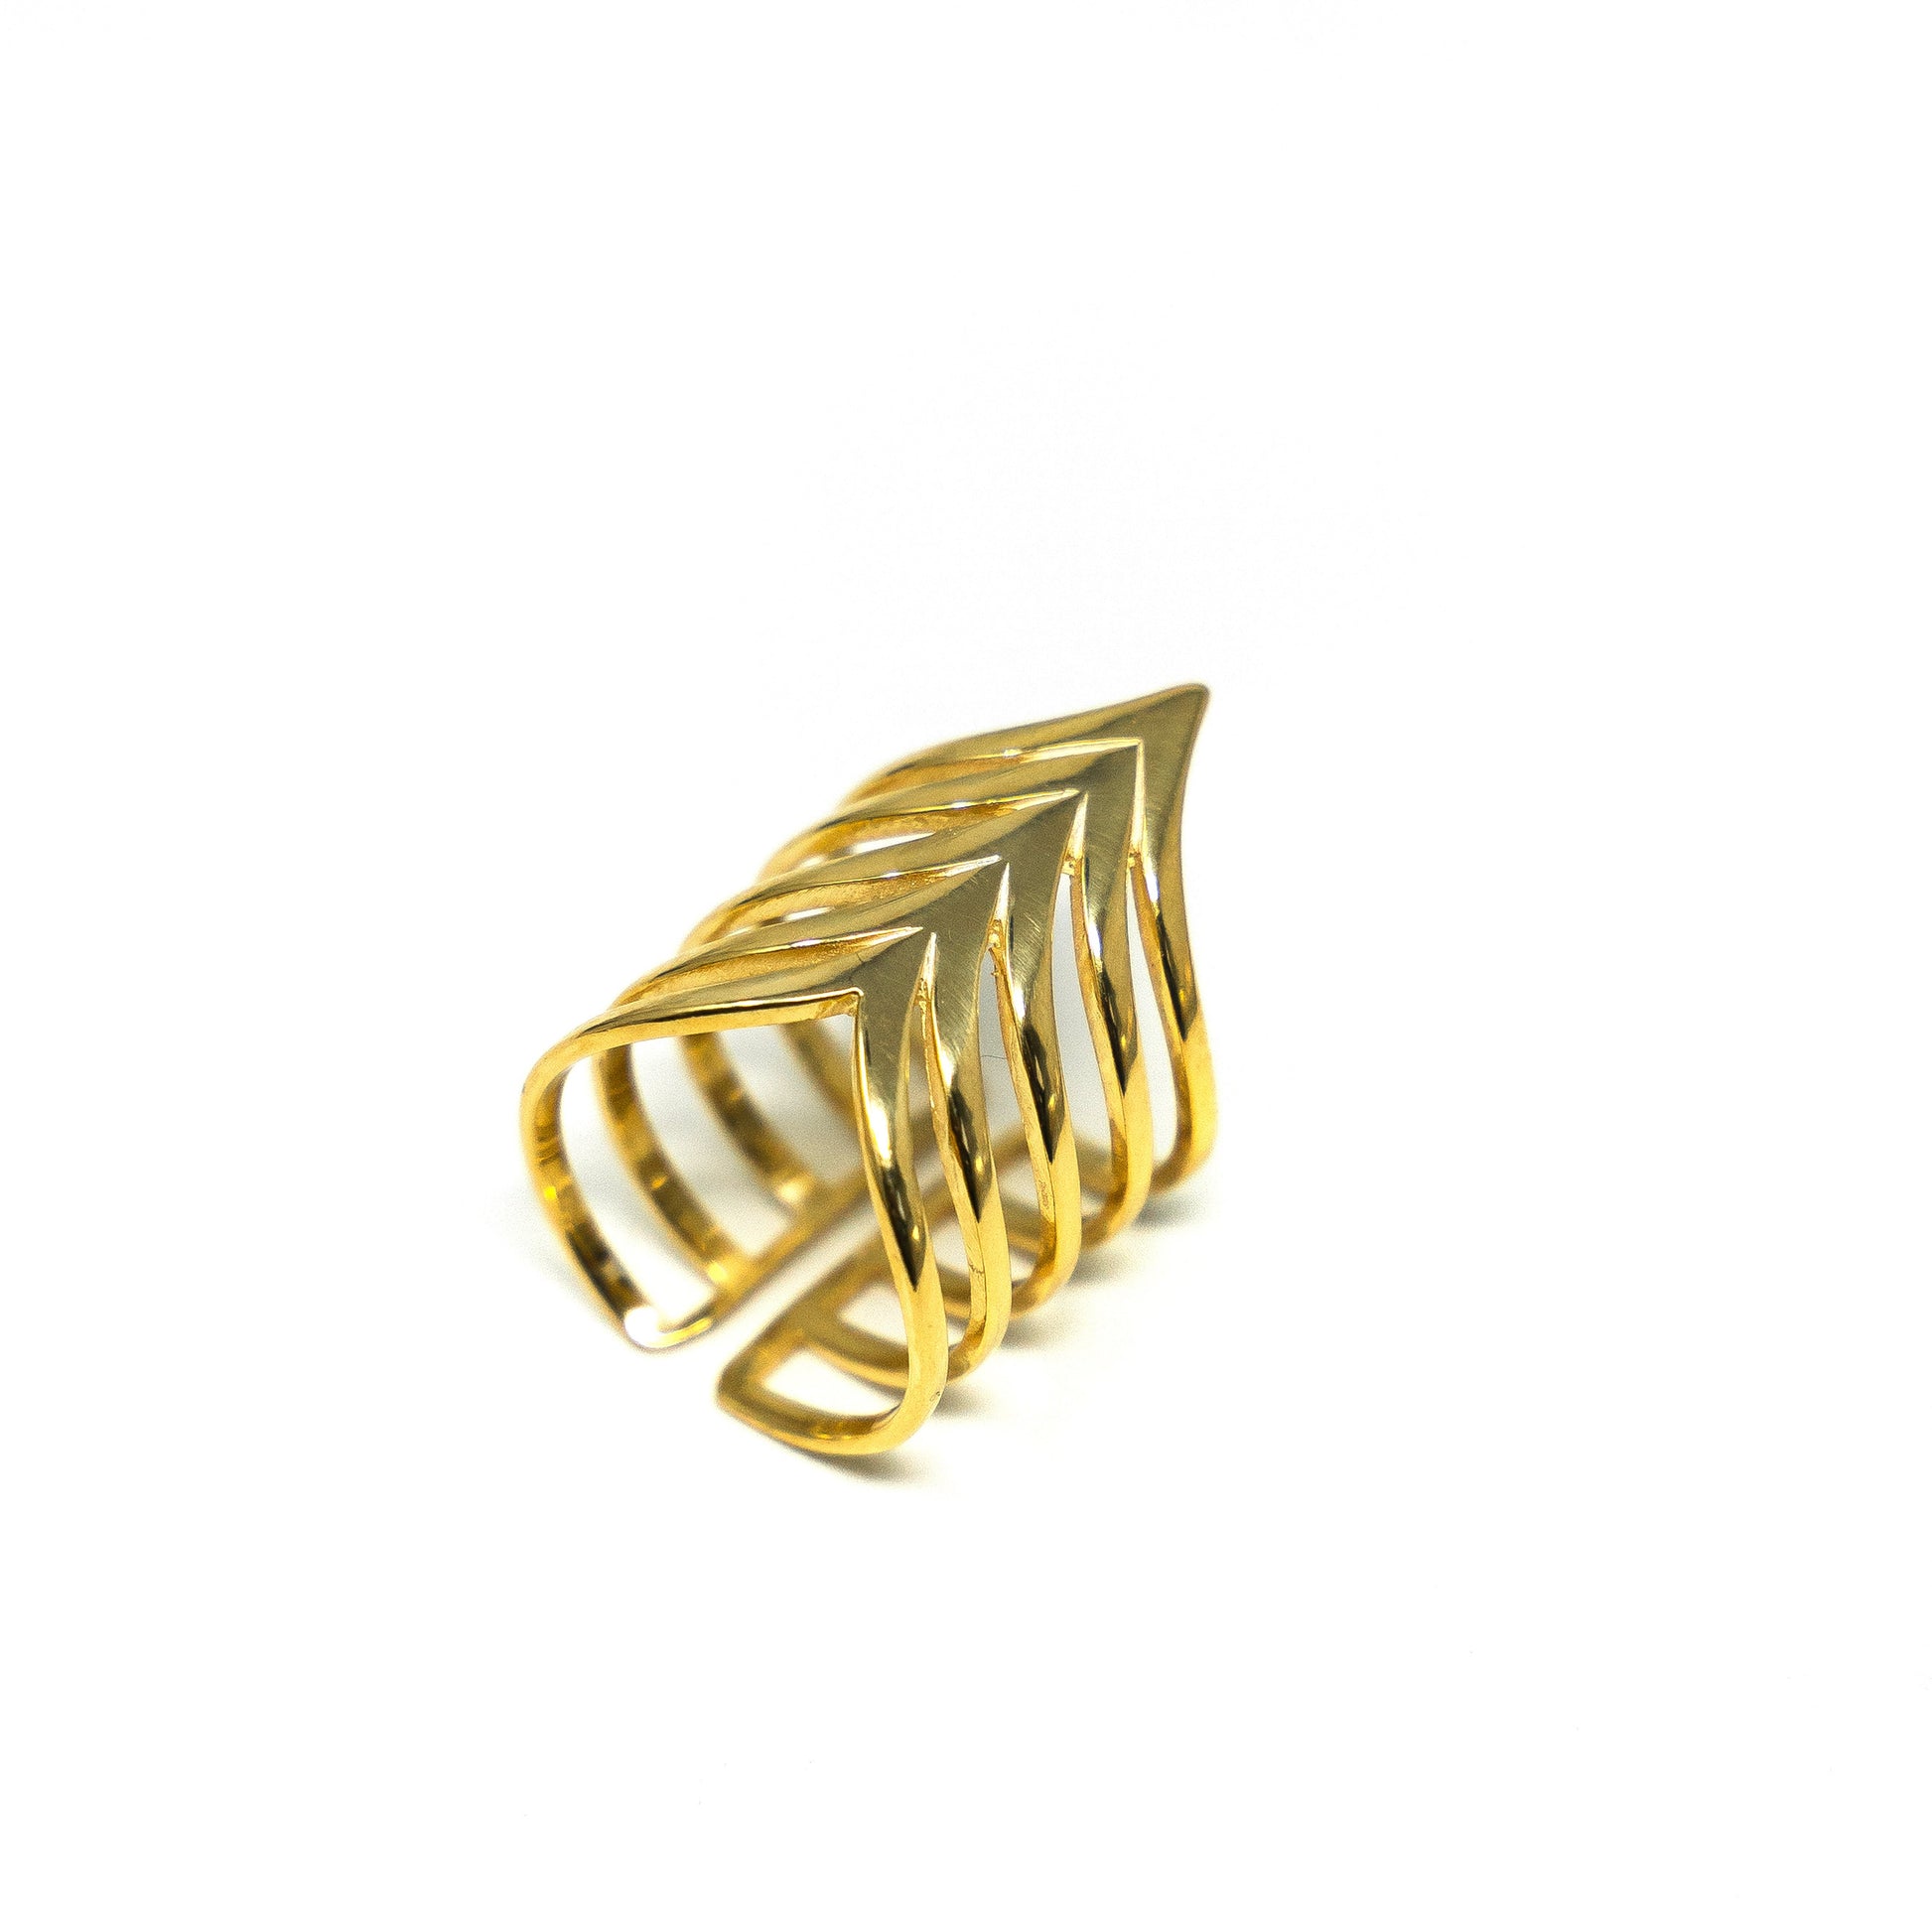 Statement Pointed Chevron Ring JEWELRY The Sis Kiss